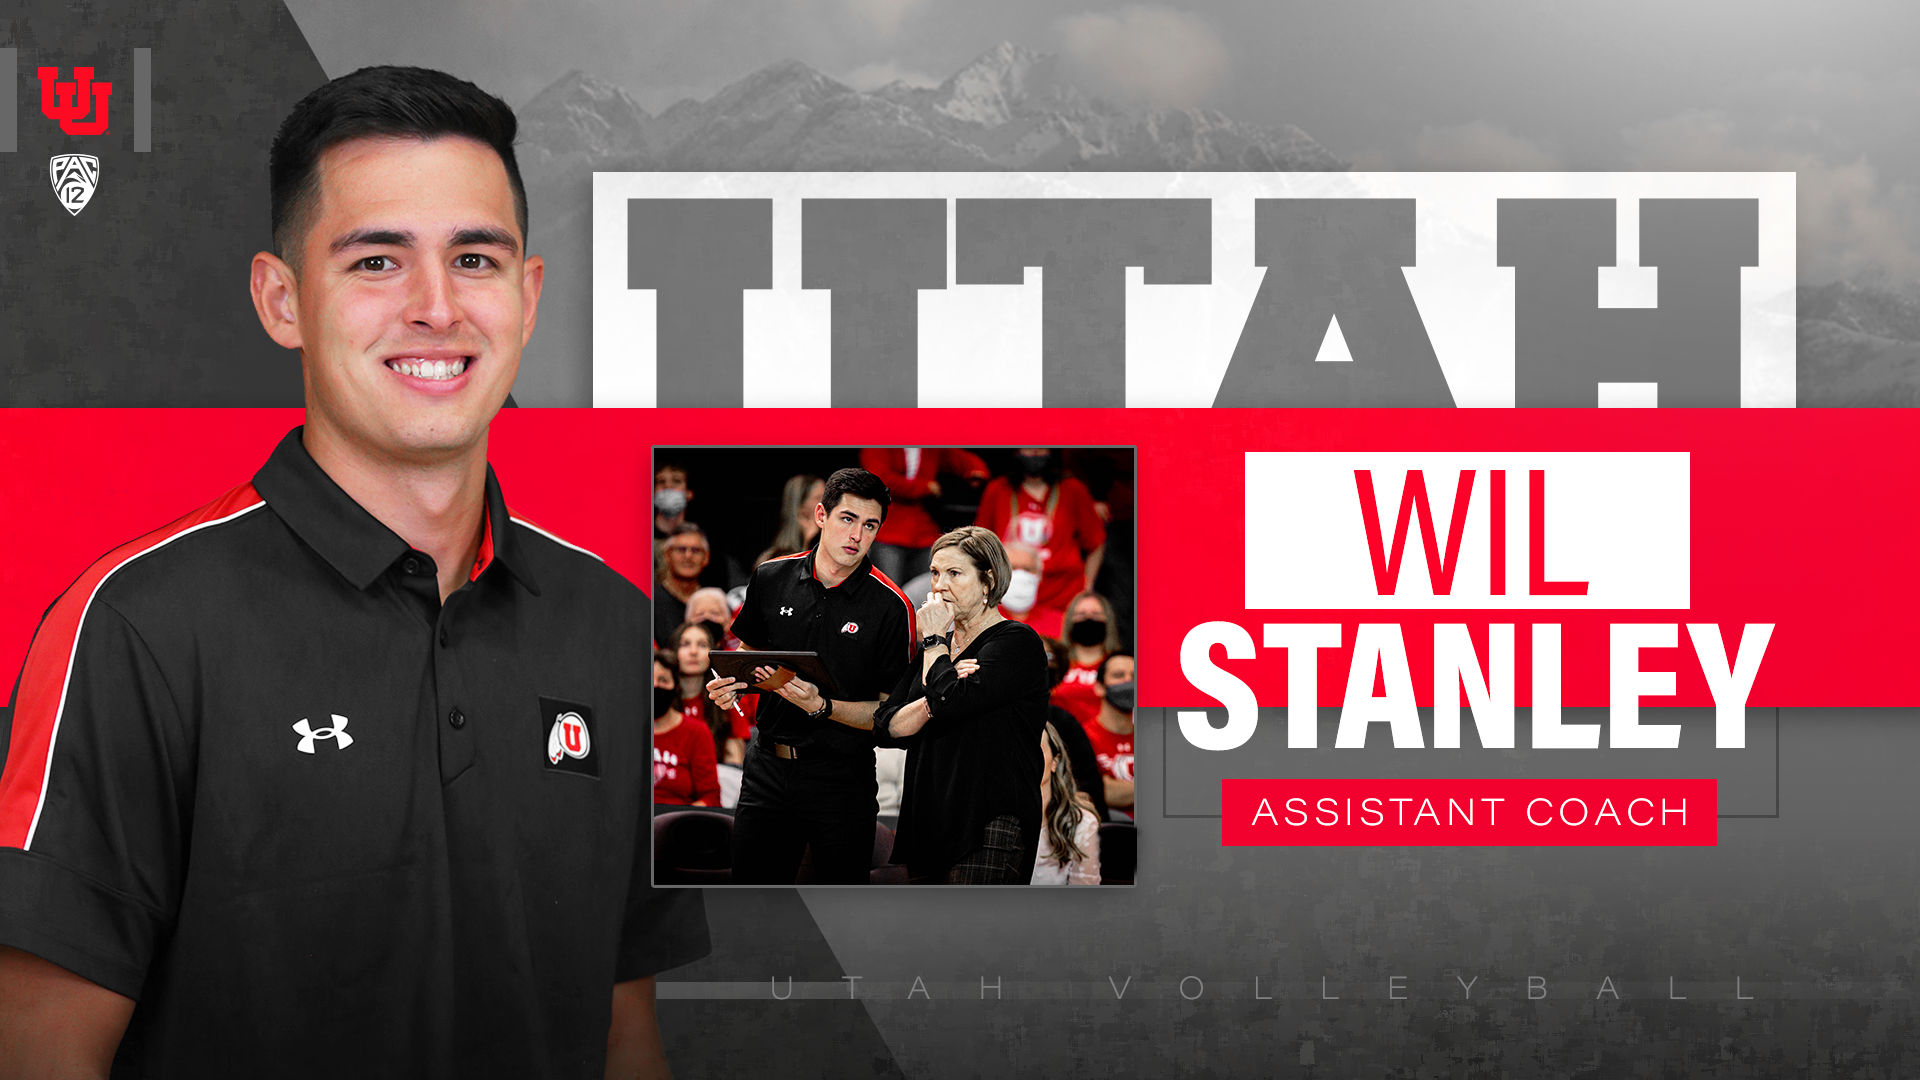 Utah Volleyball Announces Wil Stanley As Assistant Coach